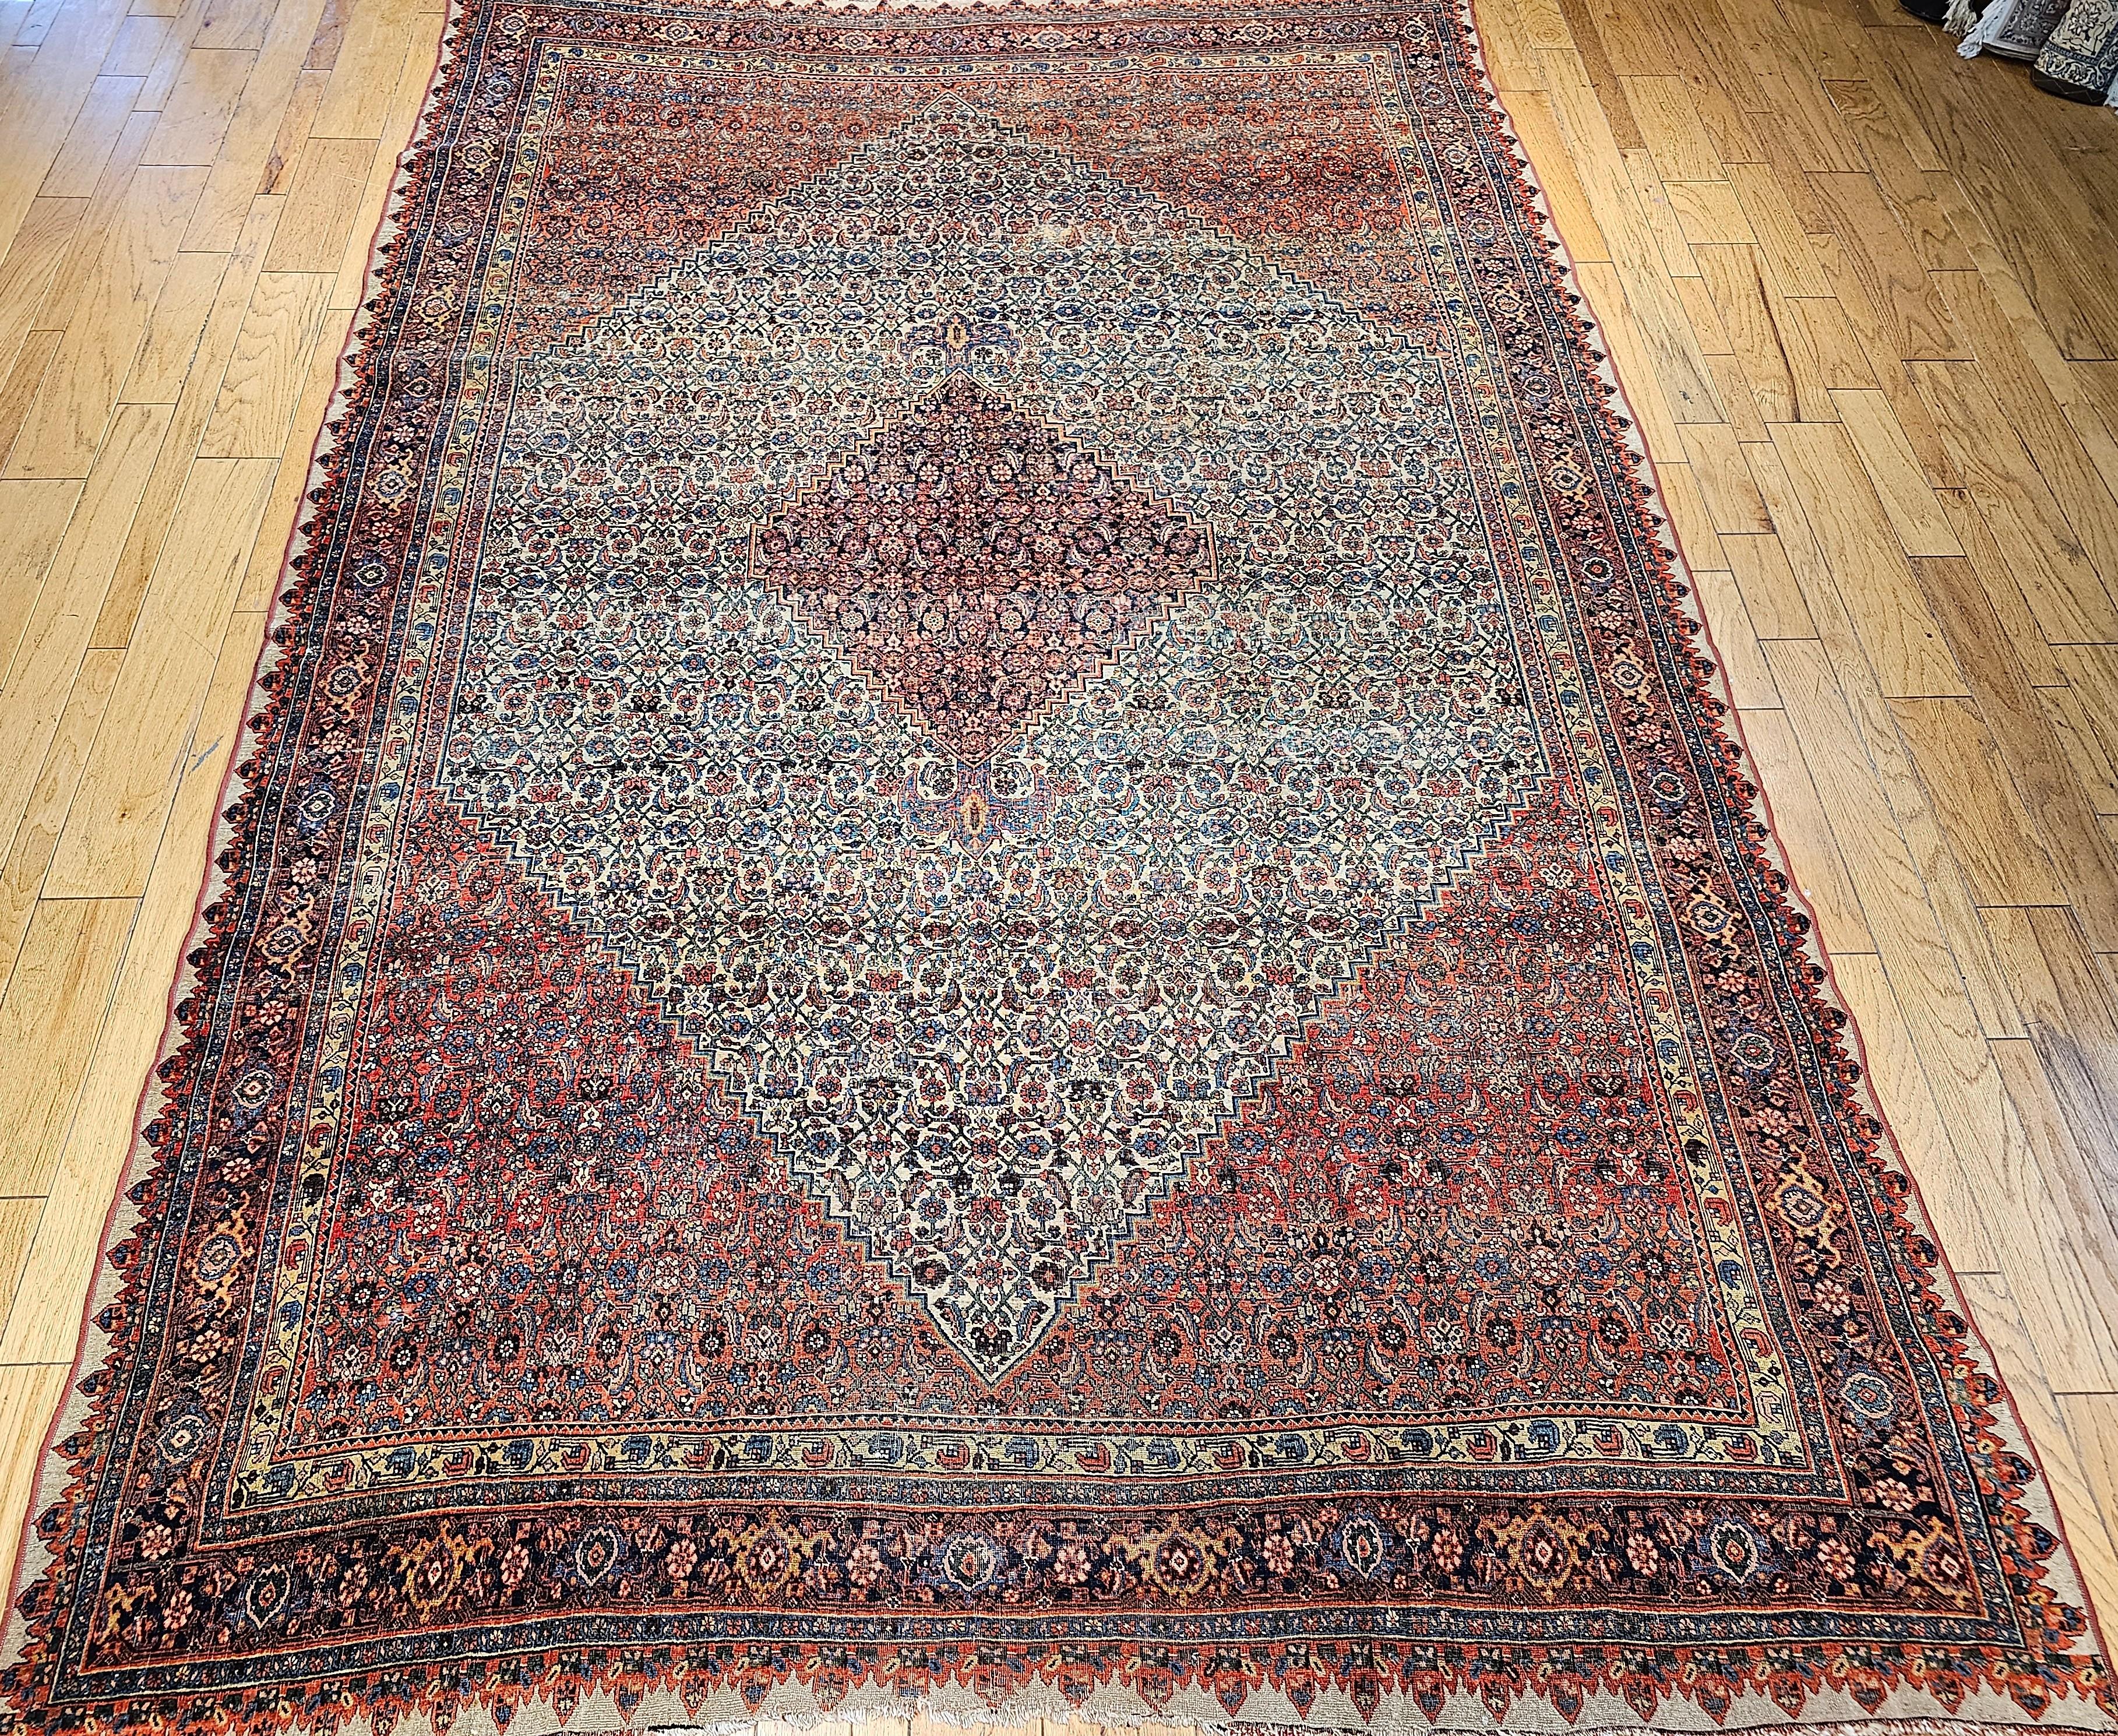 A beautiful Bidjar(Bijar) Halavi rug from the late 1800s.  The Bidjar has an Ivory field with a navy blue diamond-shaped medallion with light blue anchor pendants. It has a red subfield. The design is an uninterrupted Herati pattern in green, tan,